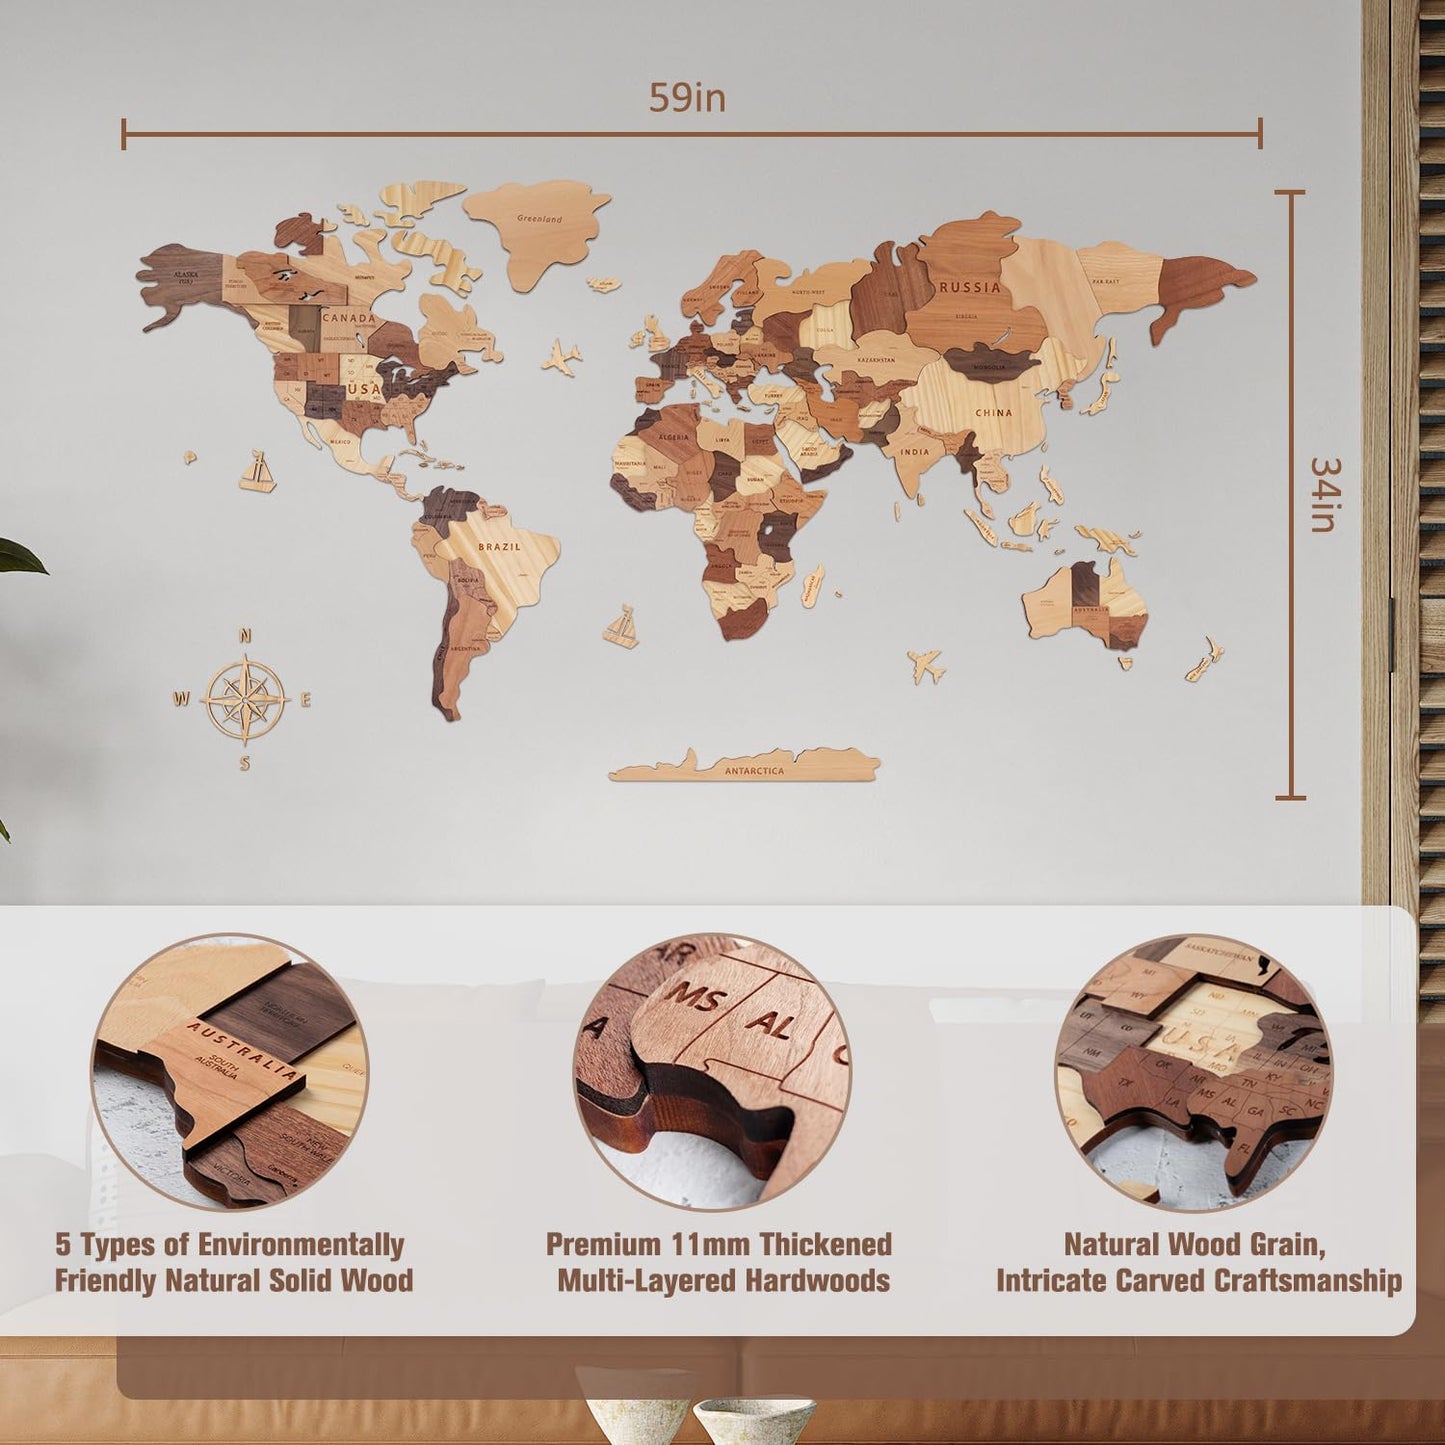 Handiwoo Wooden World Map 3D, Wood World Map Wall Art, Multilayered Wooden Map of The World Wall Decoration, Idea Housewarming Gift Large Wood Travel Map for Home & Office Dcor